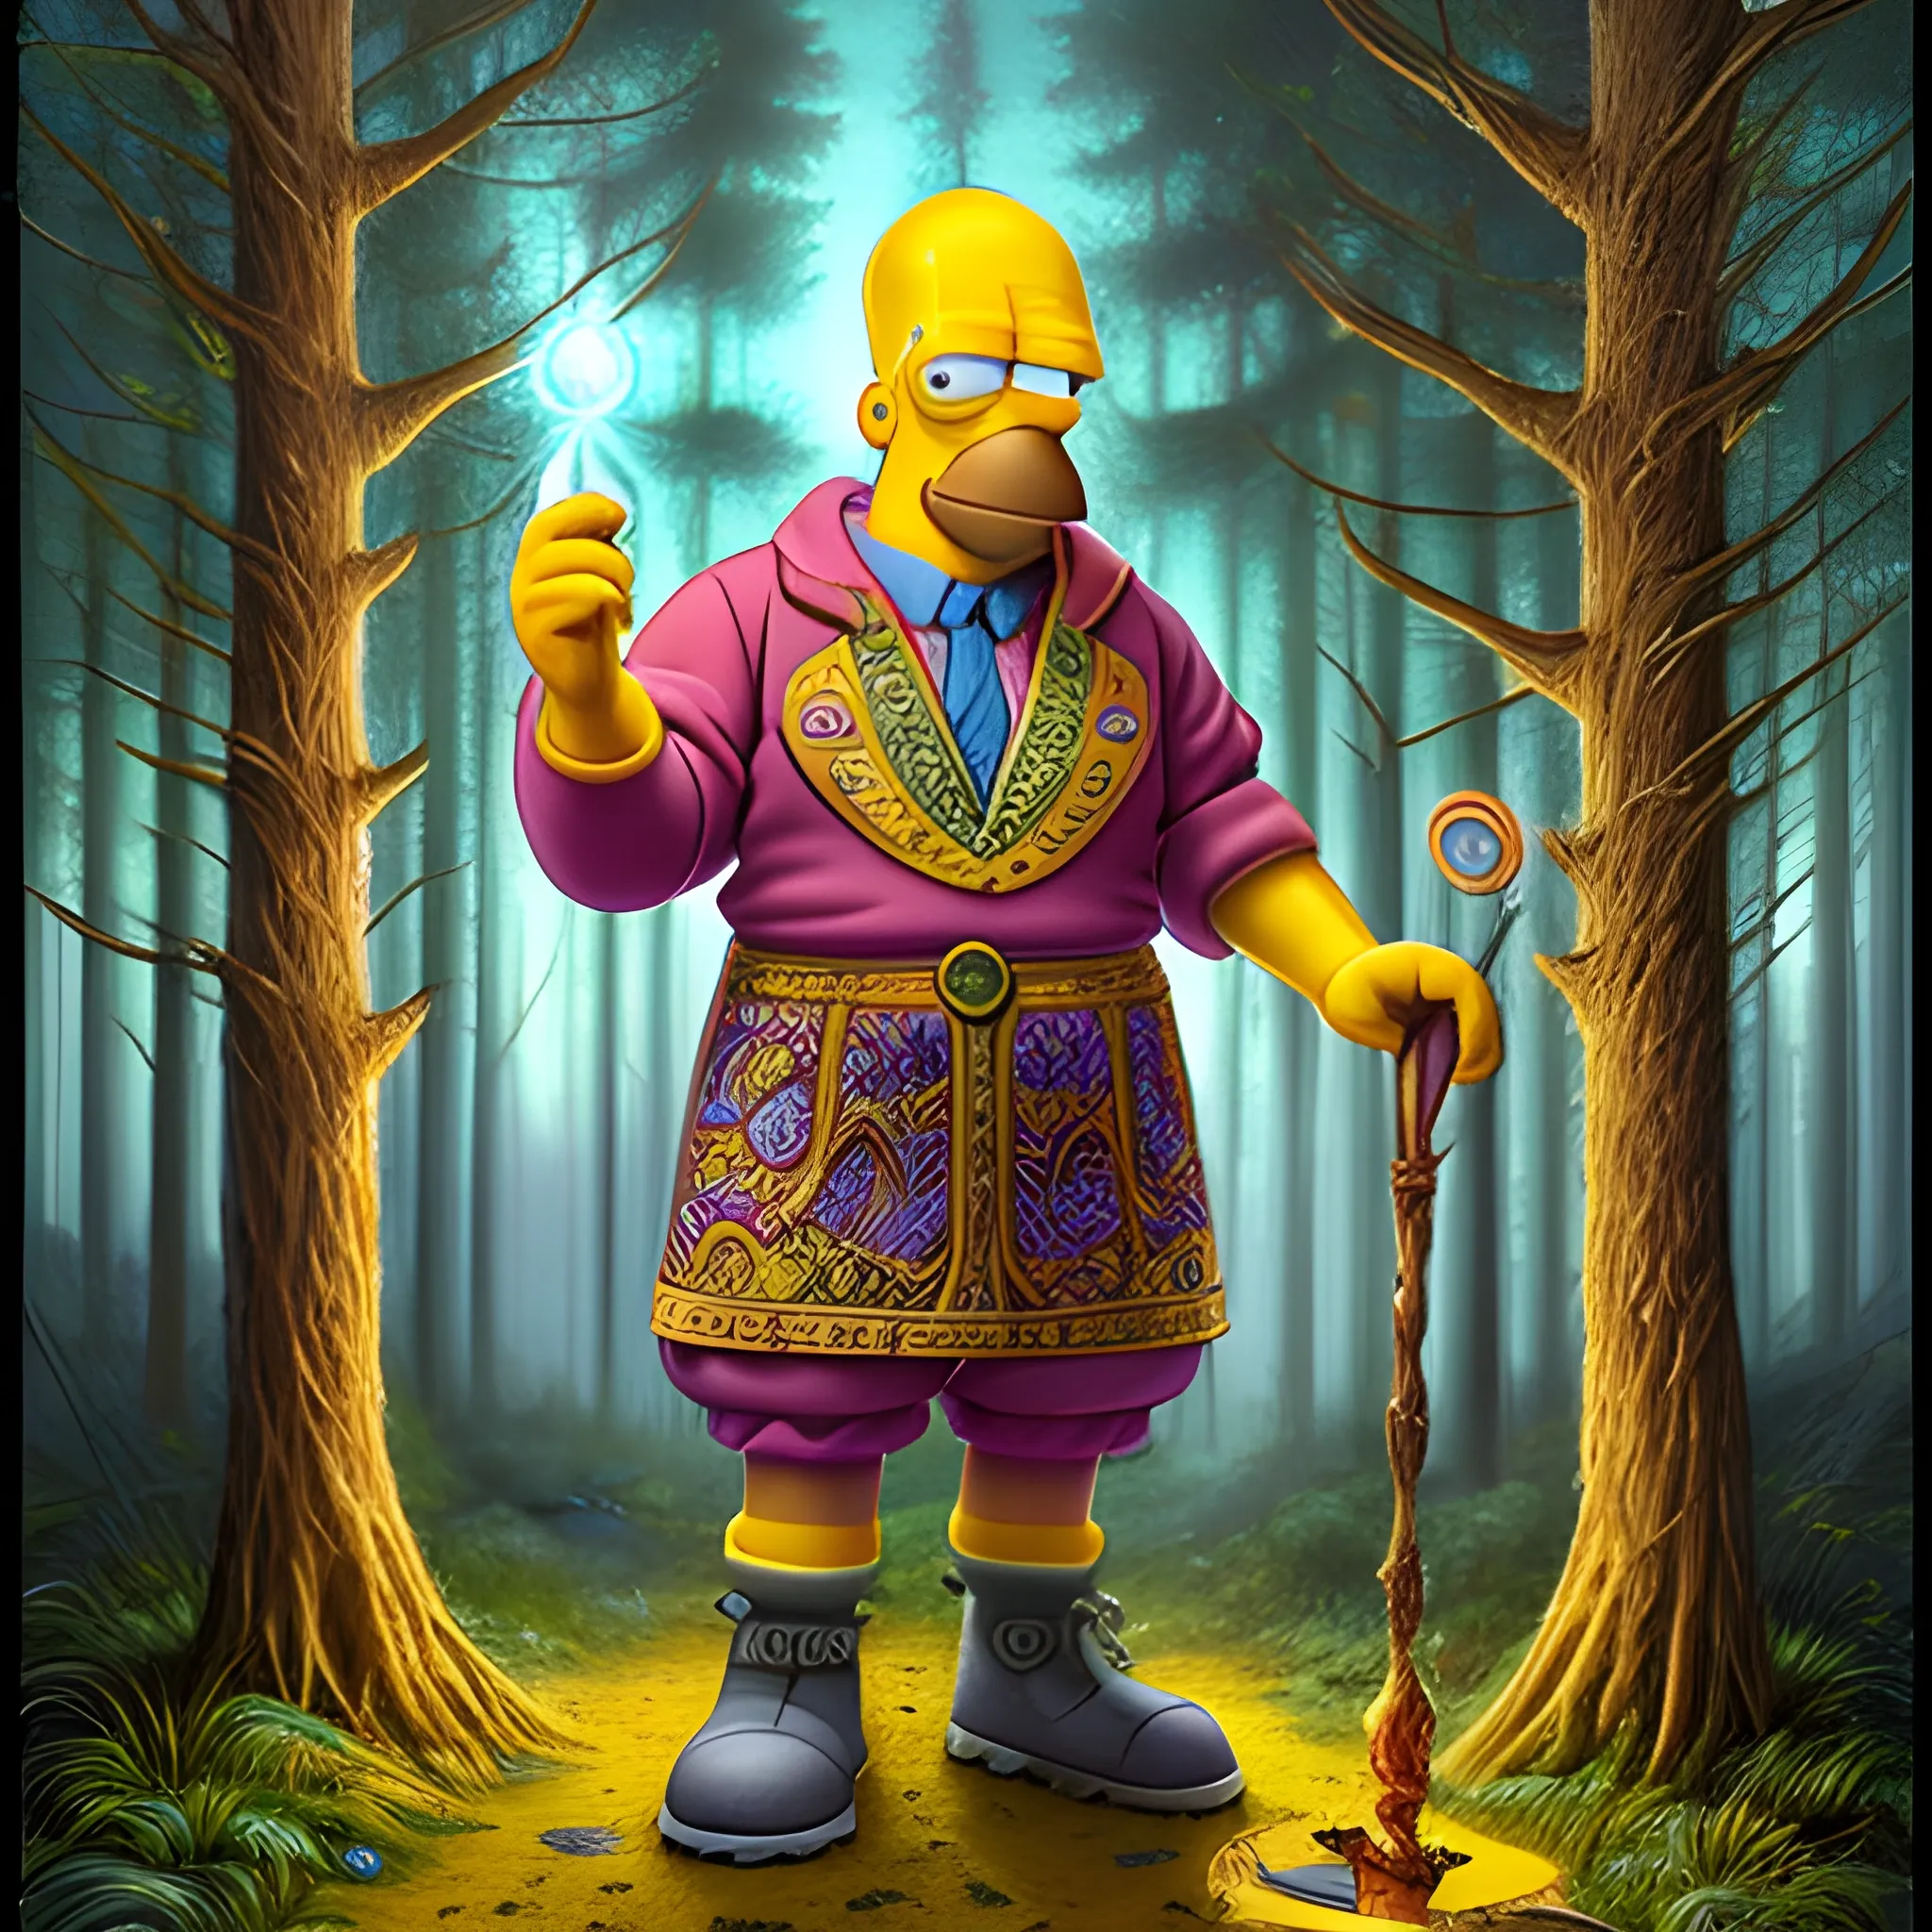 Homer Simpson, standing in the middle of the forrest path, dressed in a hyper detailed sorcerer's outfit, holds a hyper detailed magic wand from which a ray of light emanates, hyper detailed magical background